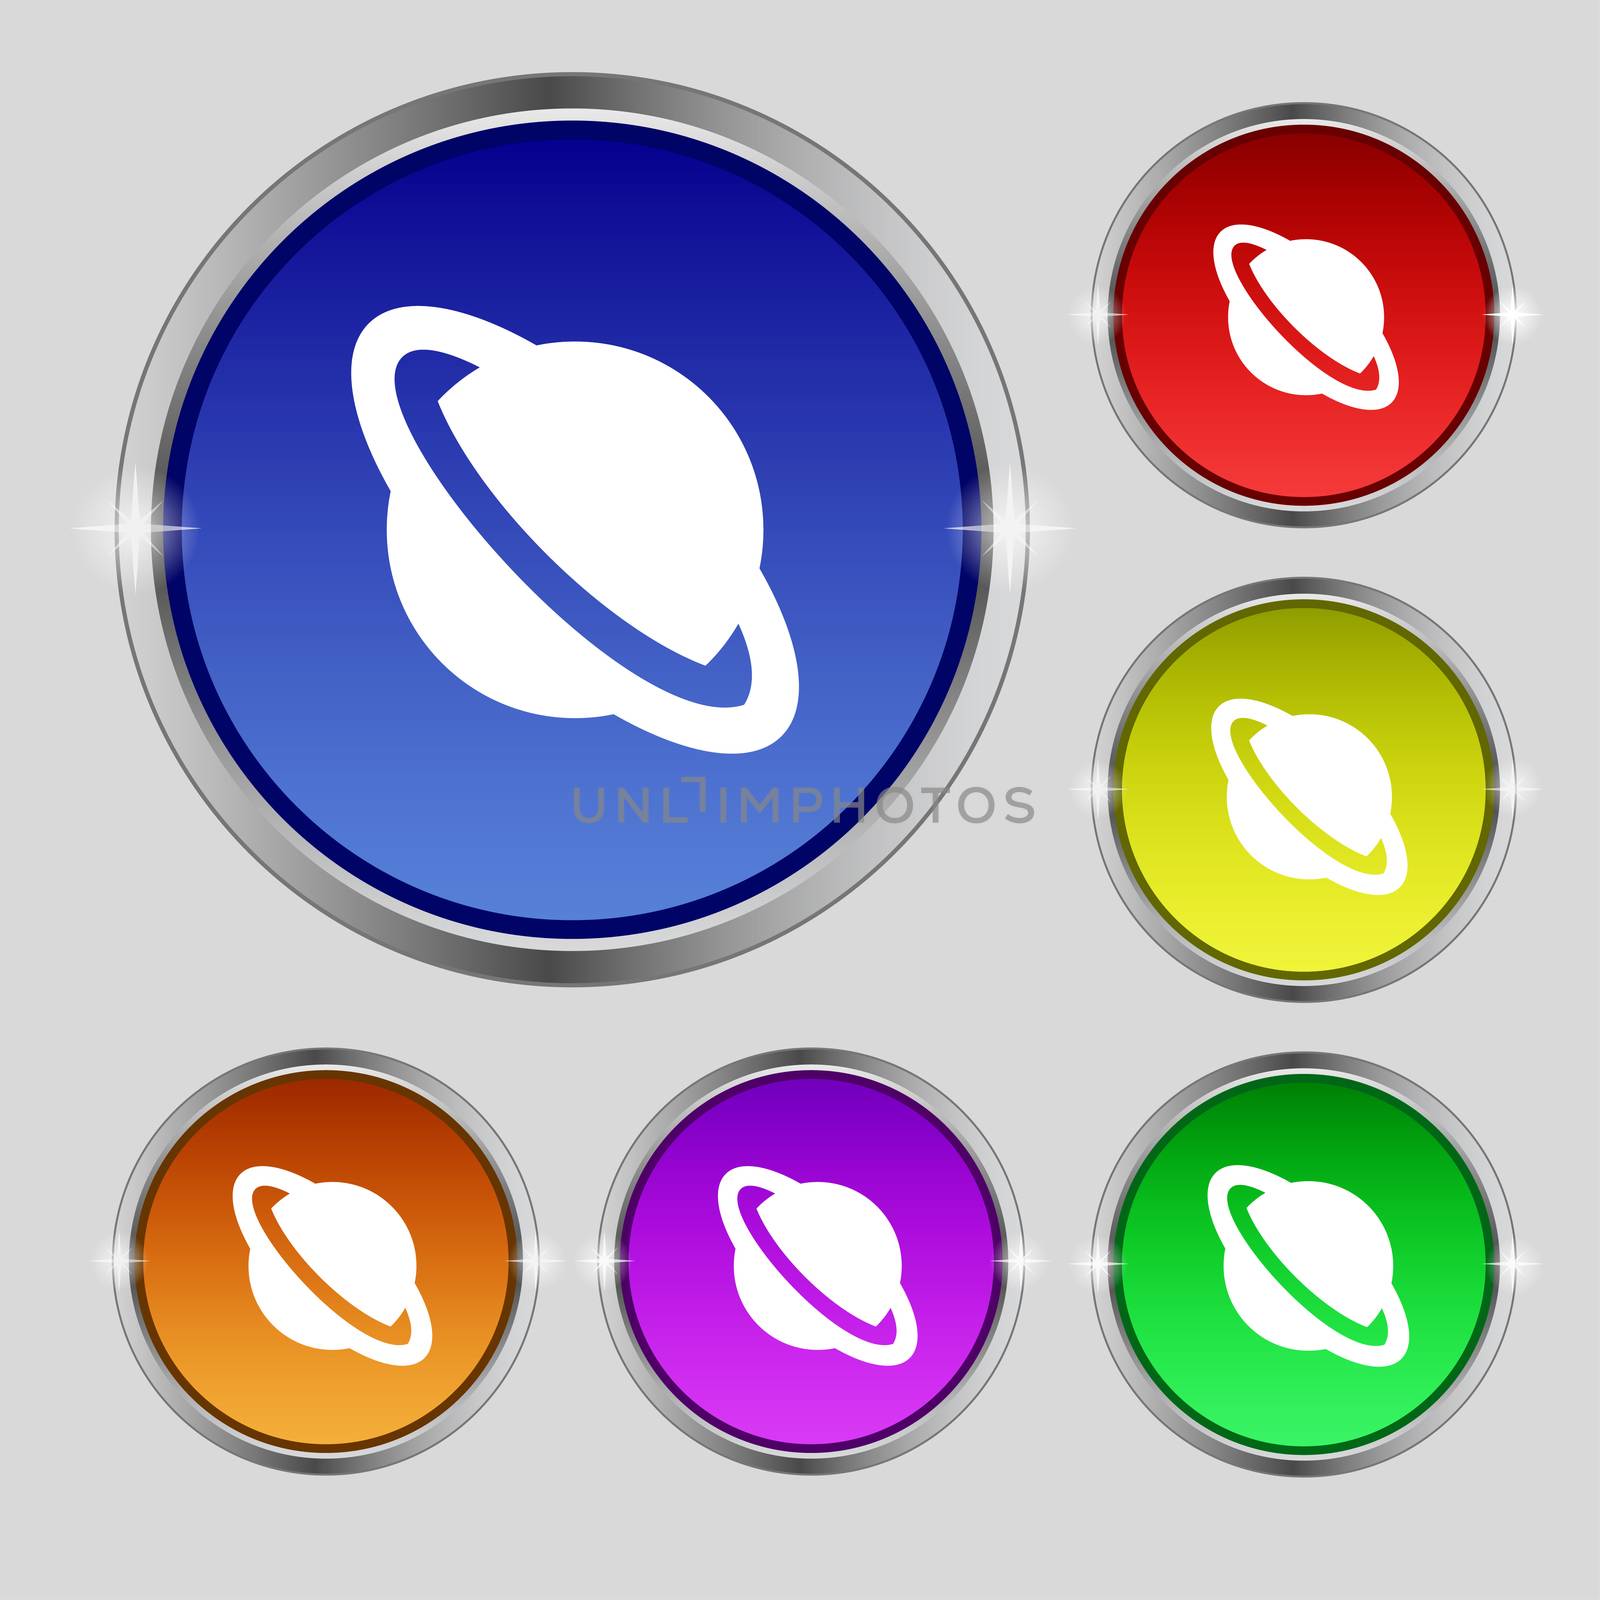 Jupiter planet icon sign. Round symbol on bright colourful buttons.  by serhii_lohvyniuk